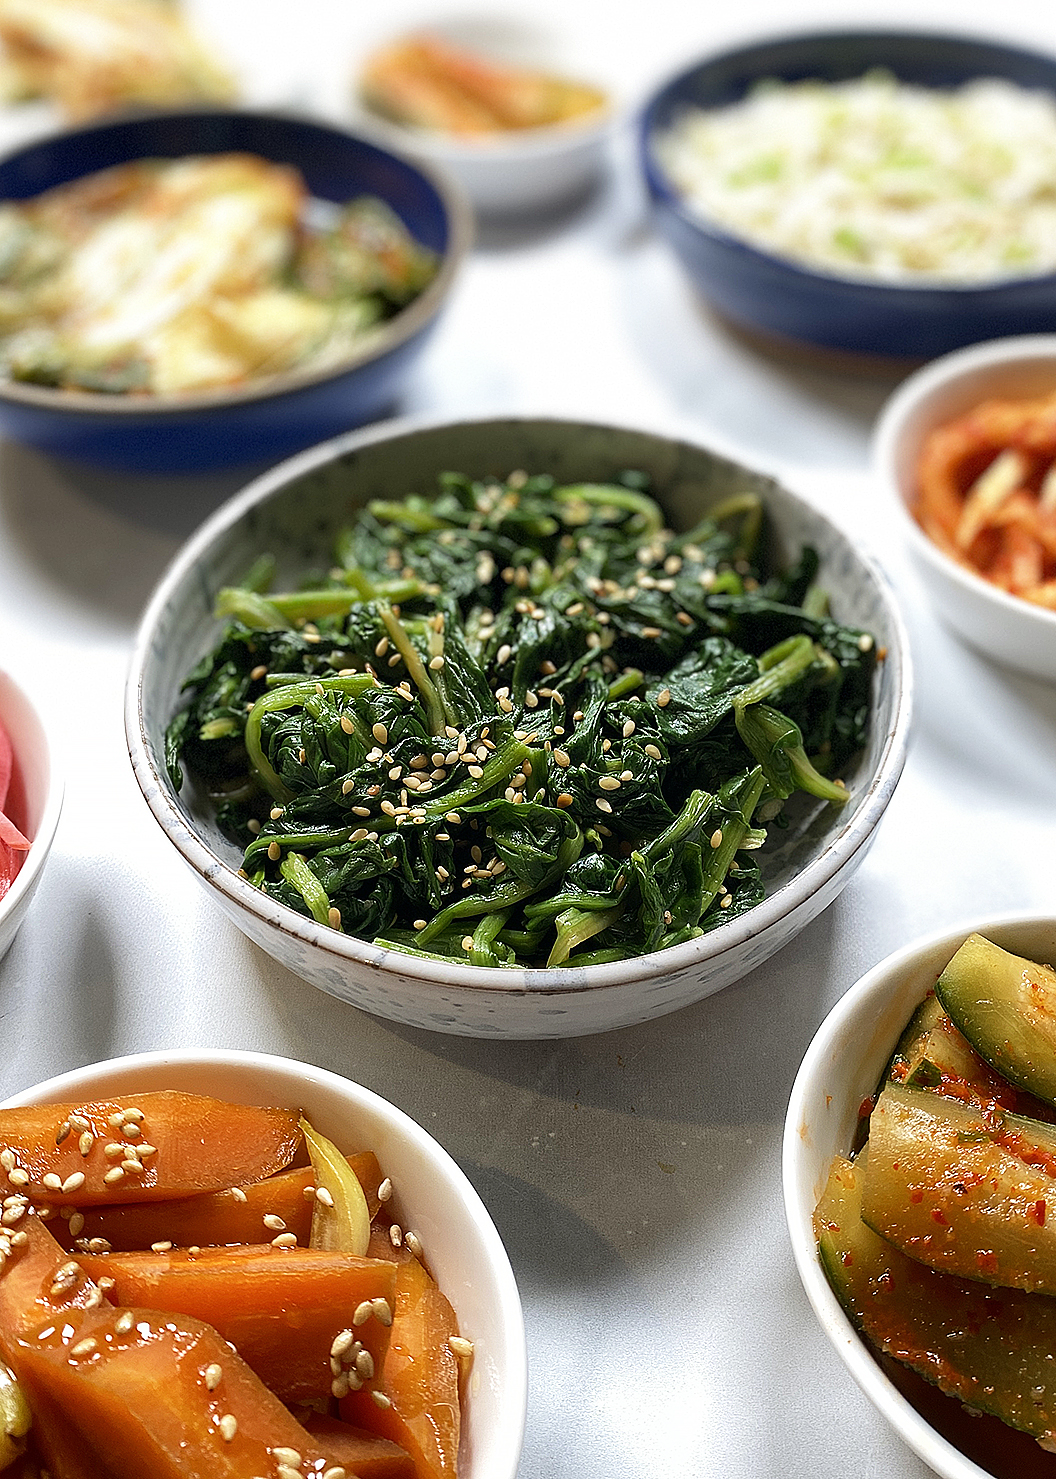 korean spinach in white bowl surrounded by assorted korean vegetable banchans: kimchi, oi kimchi, spicy marinated radish, bean sprouts, carrots, pickled daikon